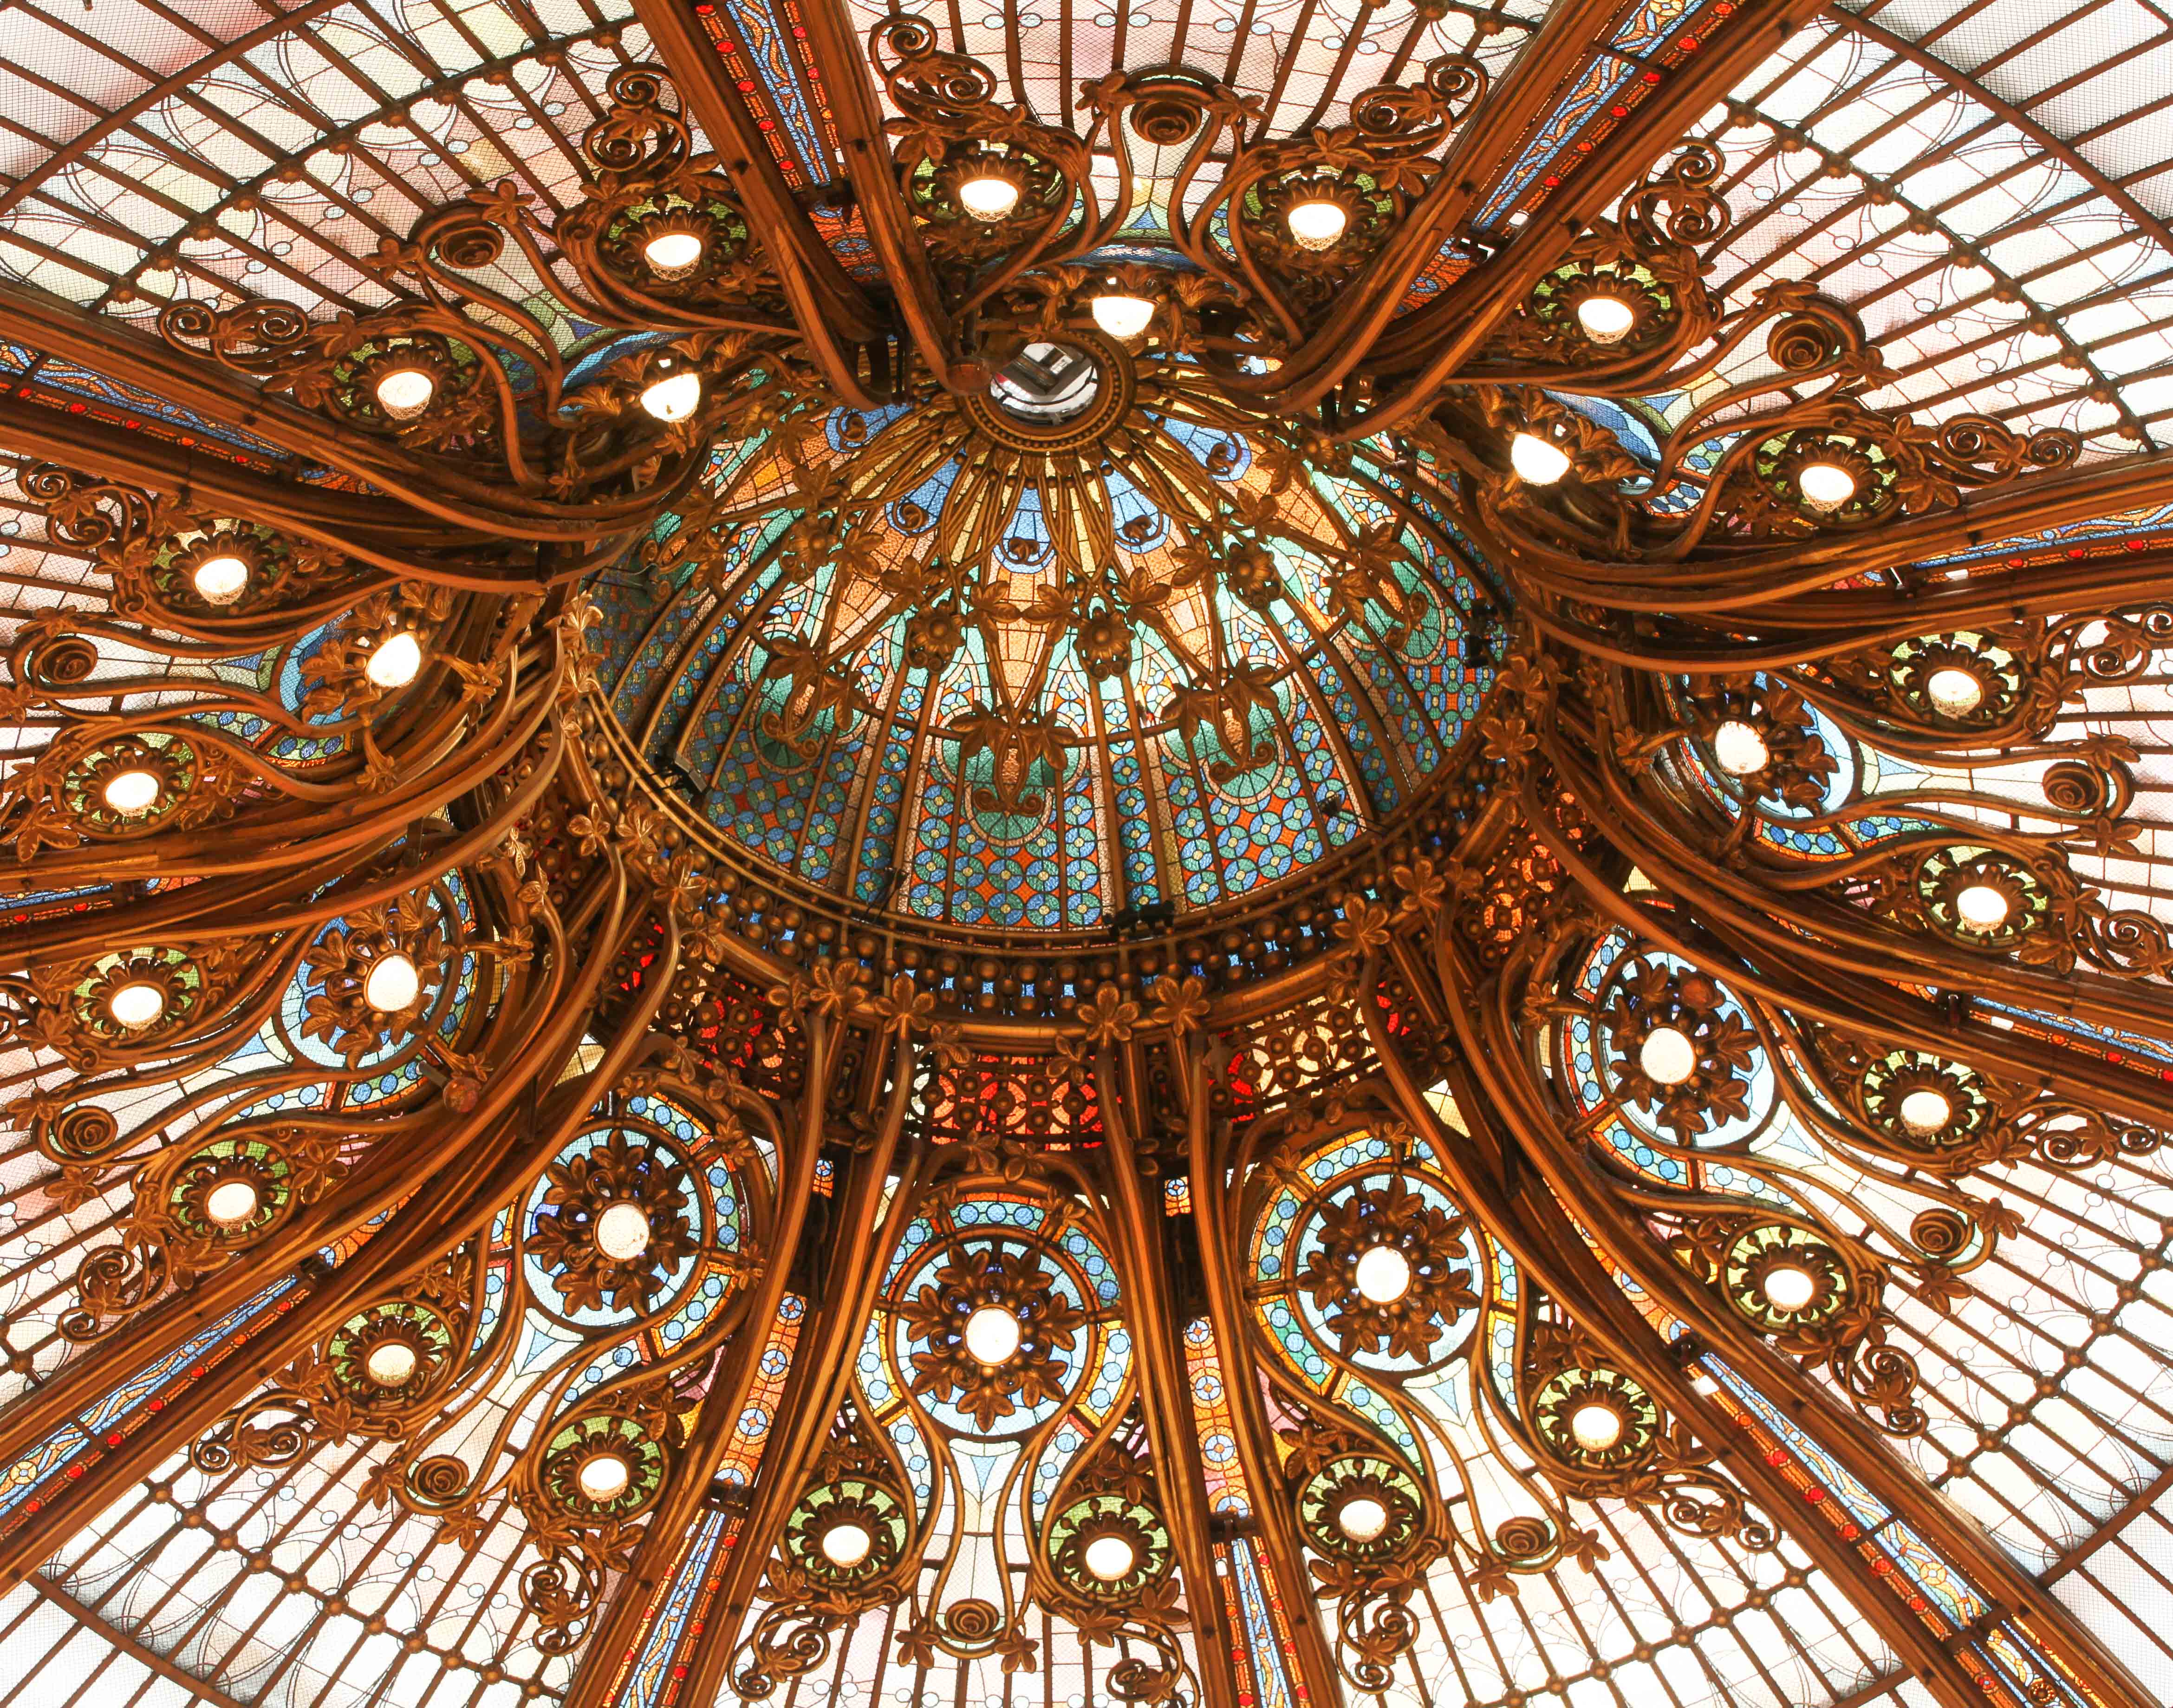 Galeries Lafayette’s cupula’s history